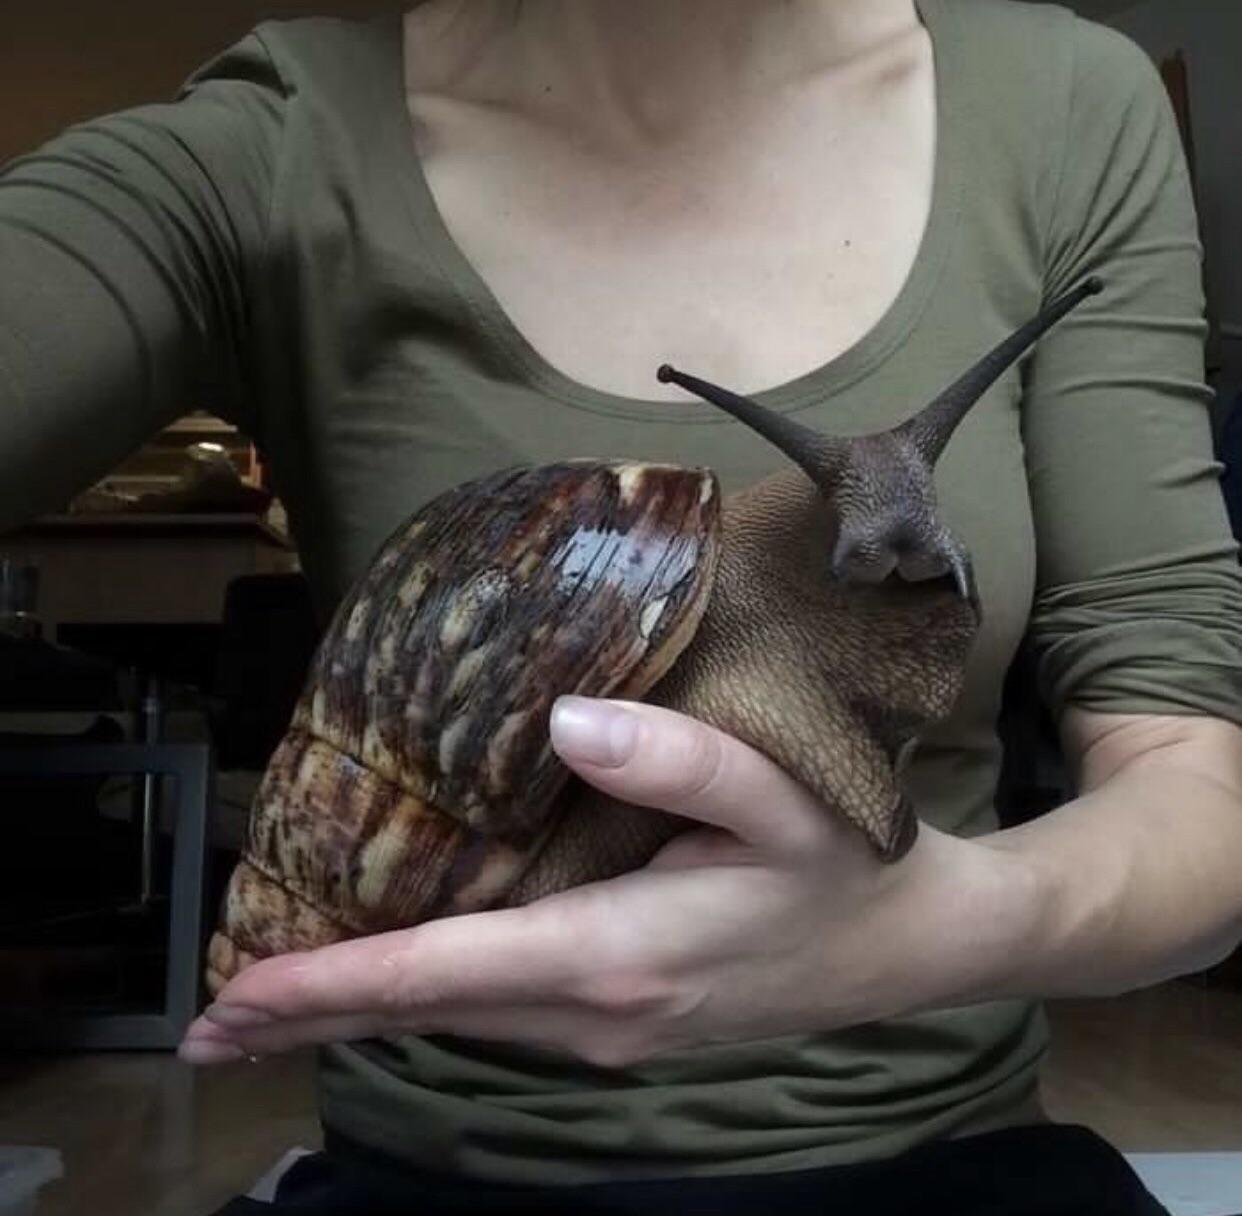 Giant African Land Snails. Doctor Dolittle would be impressed.